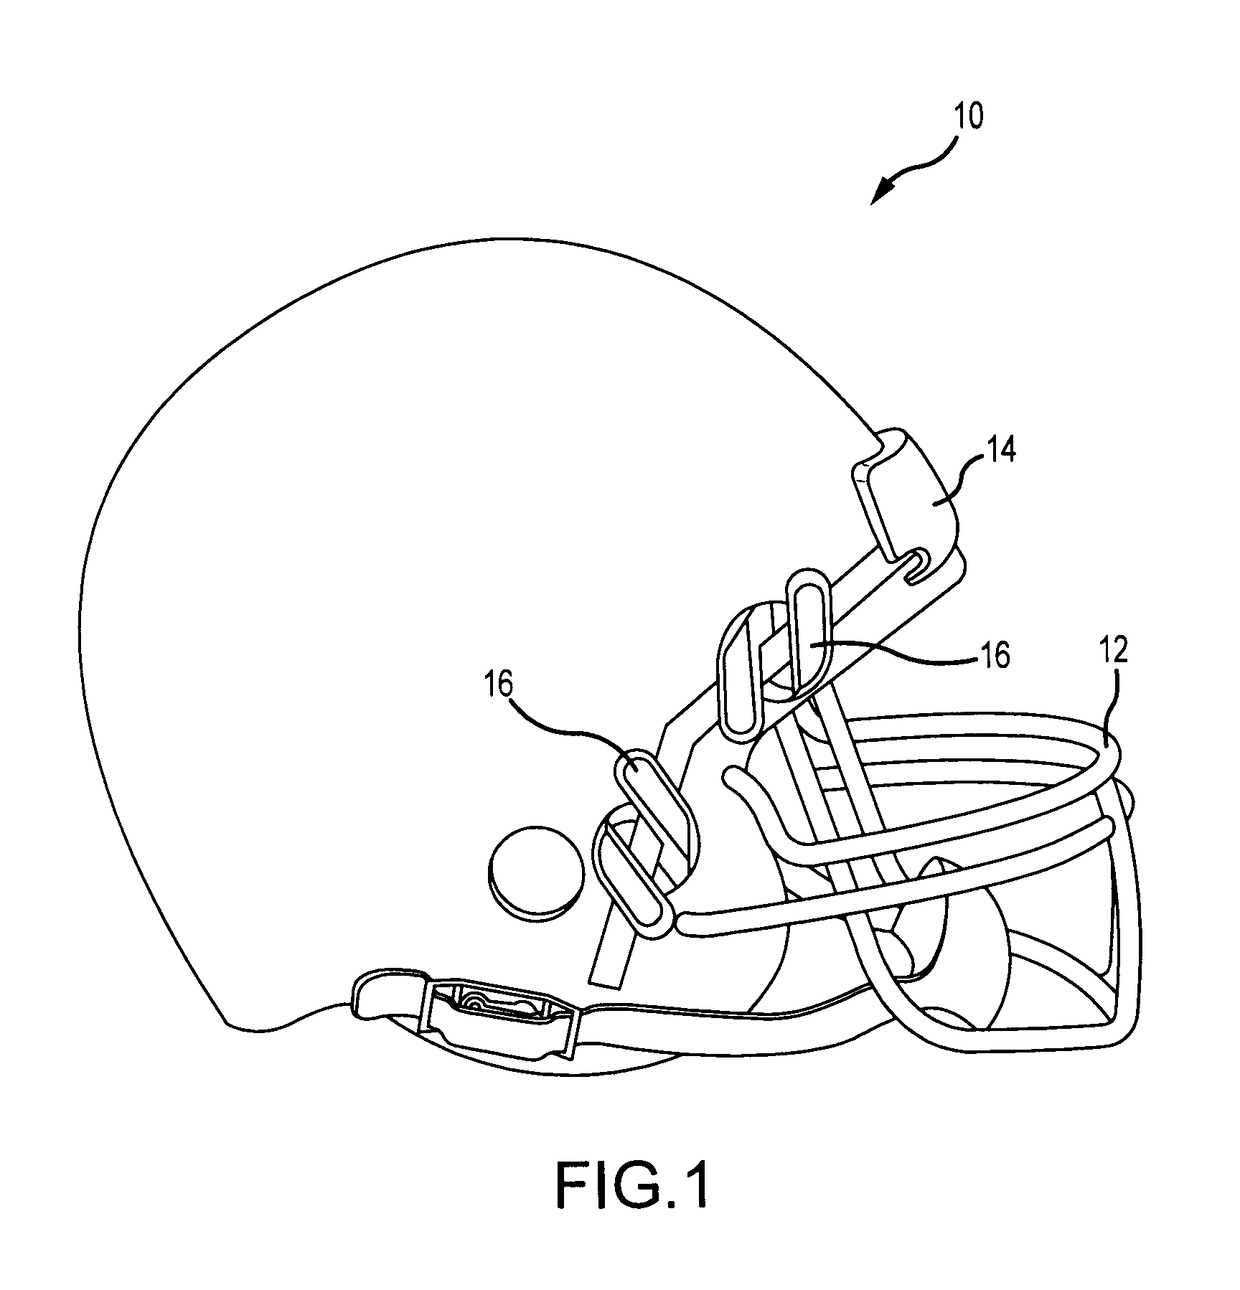 Helmet for reducing concussive forces during collision and facilitating rapid facemask removal